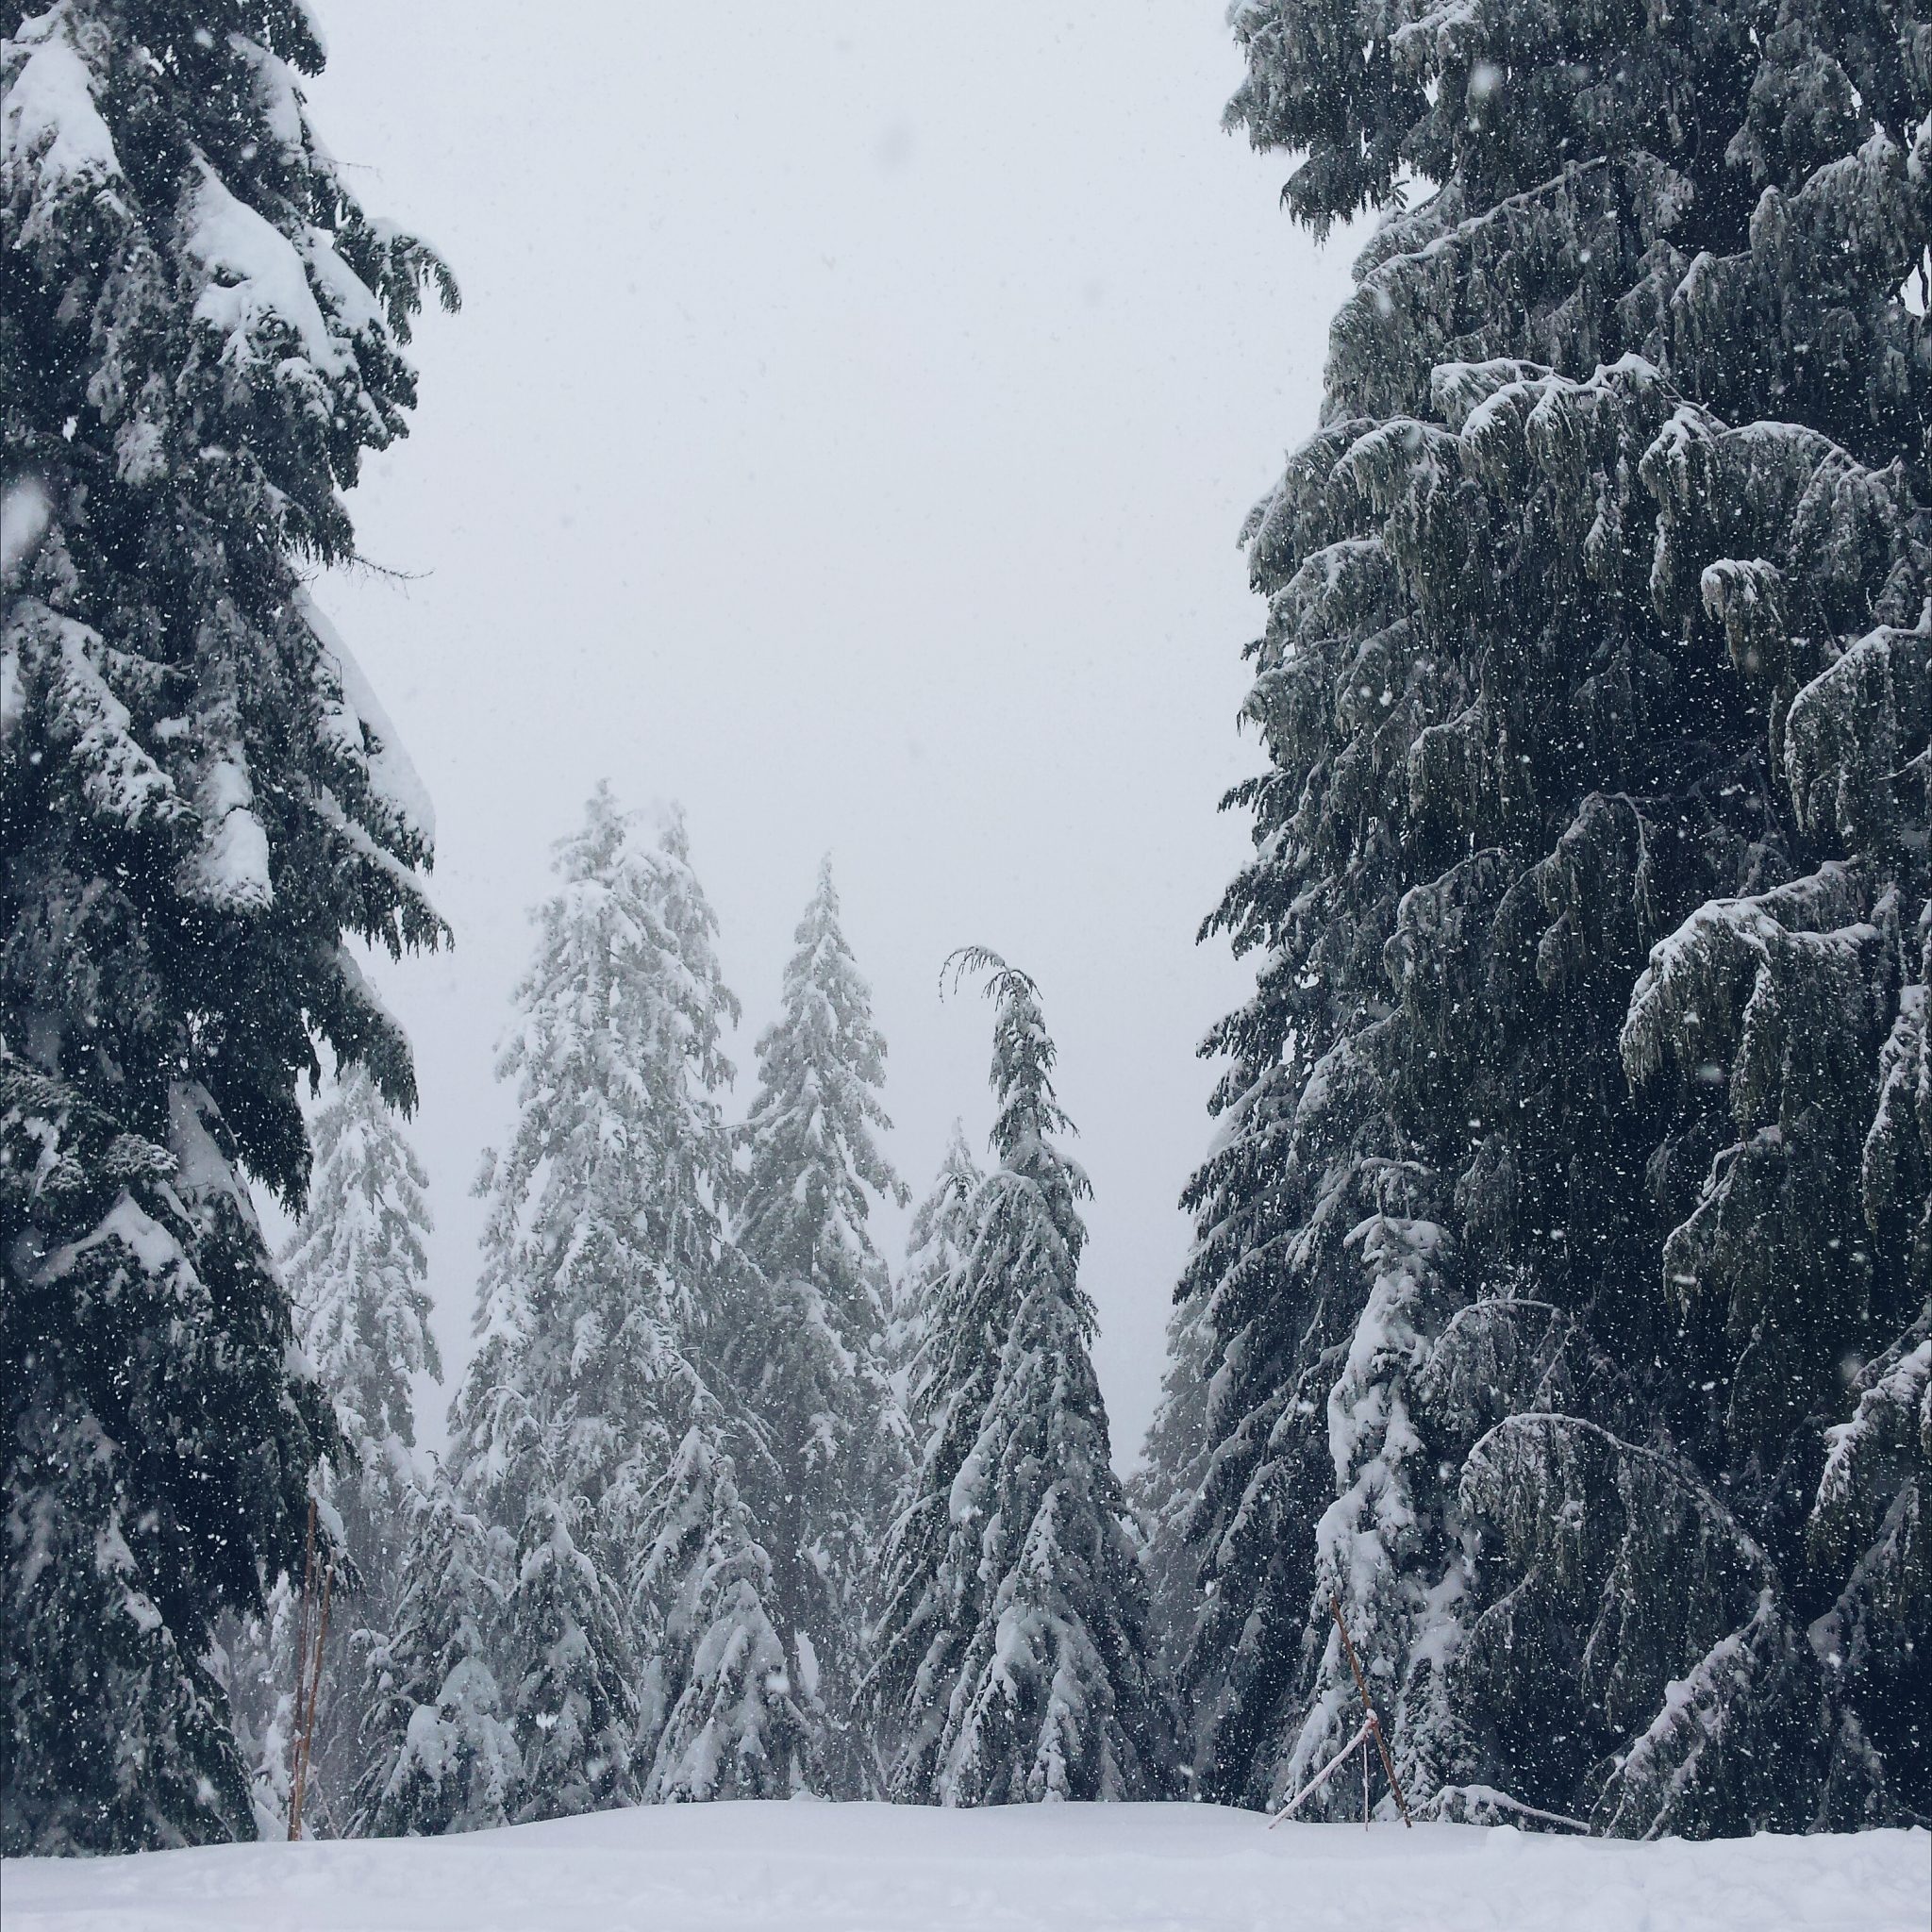 Mount Seymour in Vancouver, Canada